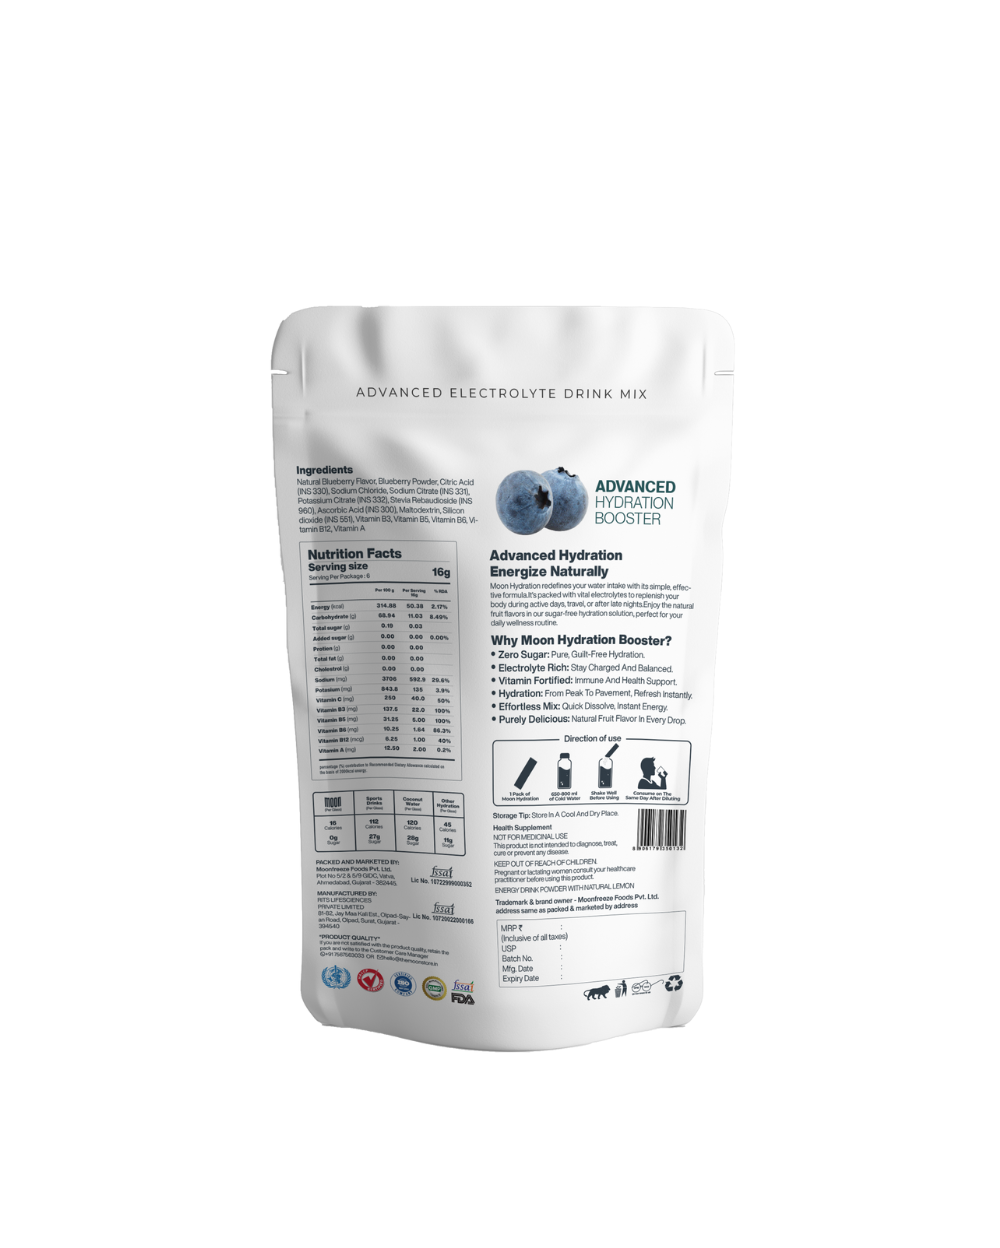 A pouch of Moon Lunar Green Apple + Blueberry Hydration Booster electrolyte drink mix featuring product information and nutritional facts by MOONFREEZE FOODS PRIVATE LIMITED.